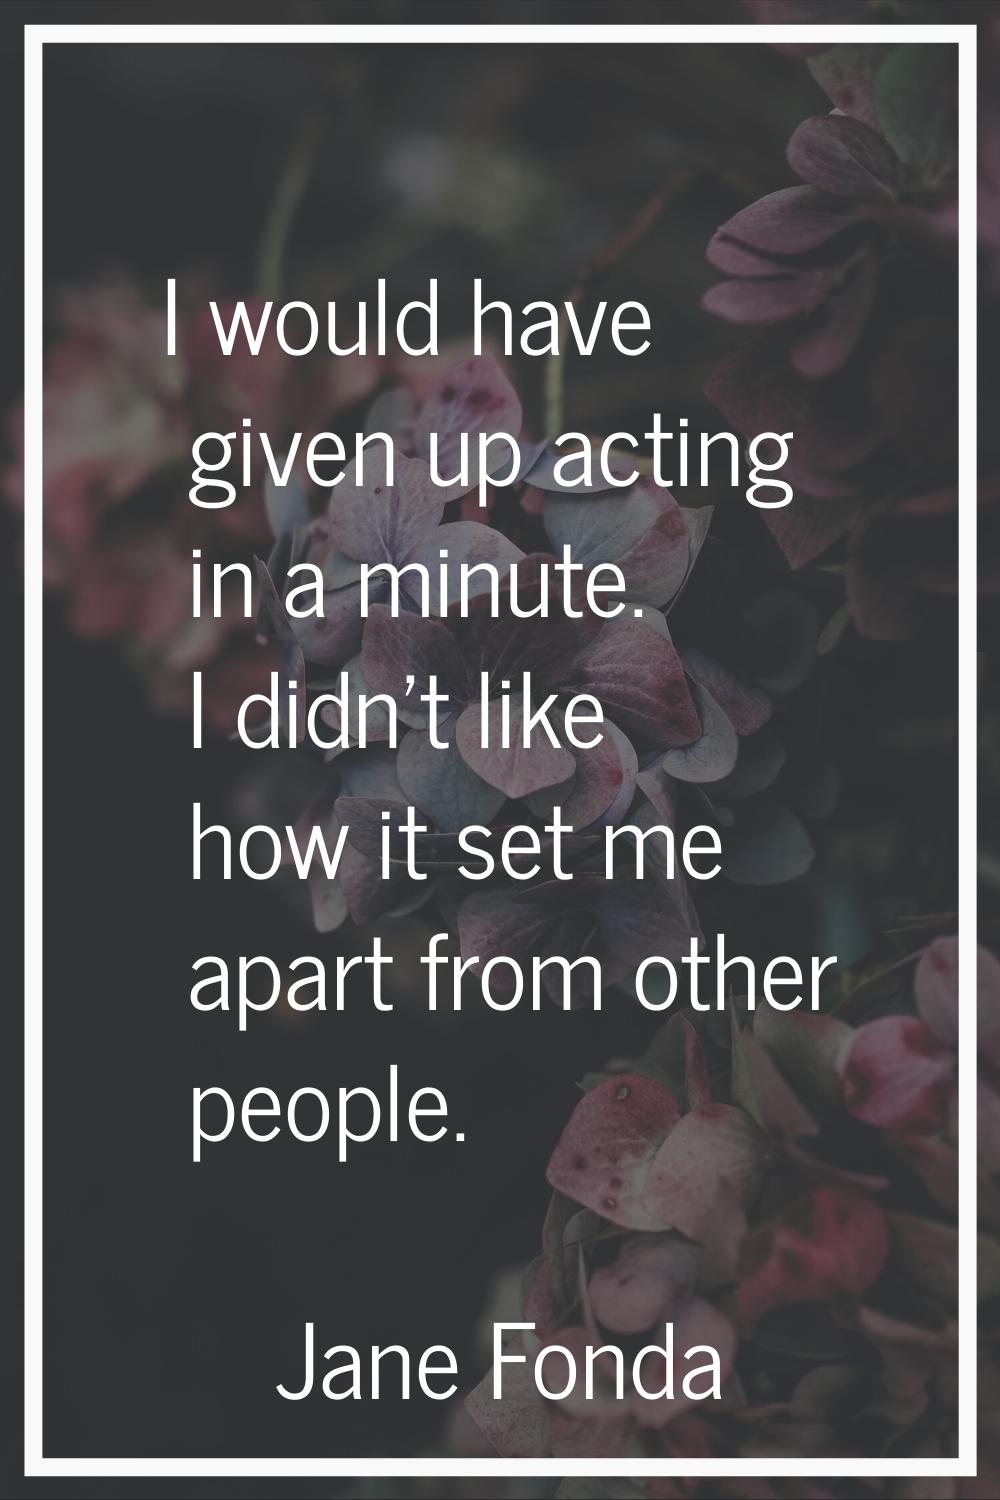 I would have given up acting in a minute. I didn't like how it set me apart from other people.